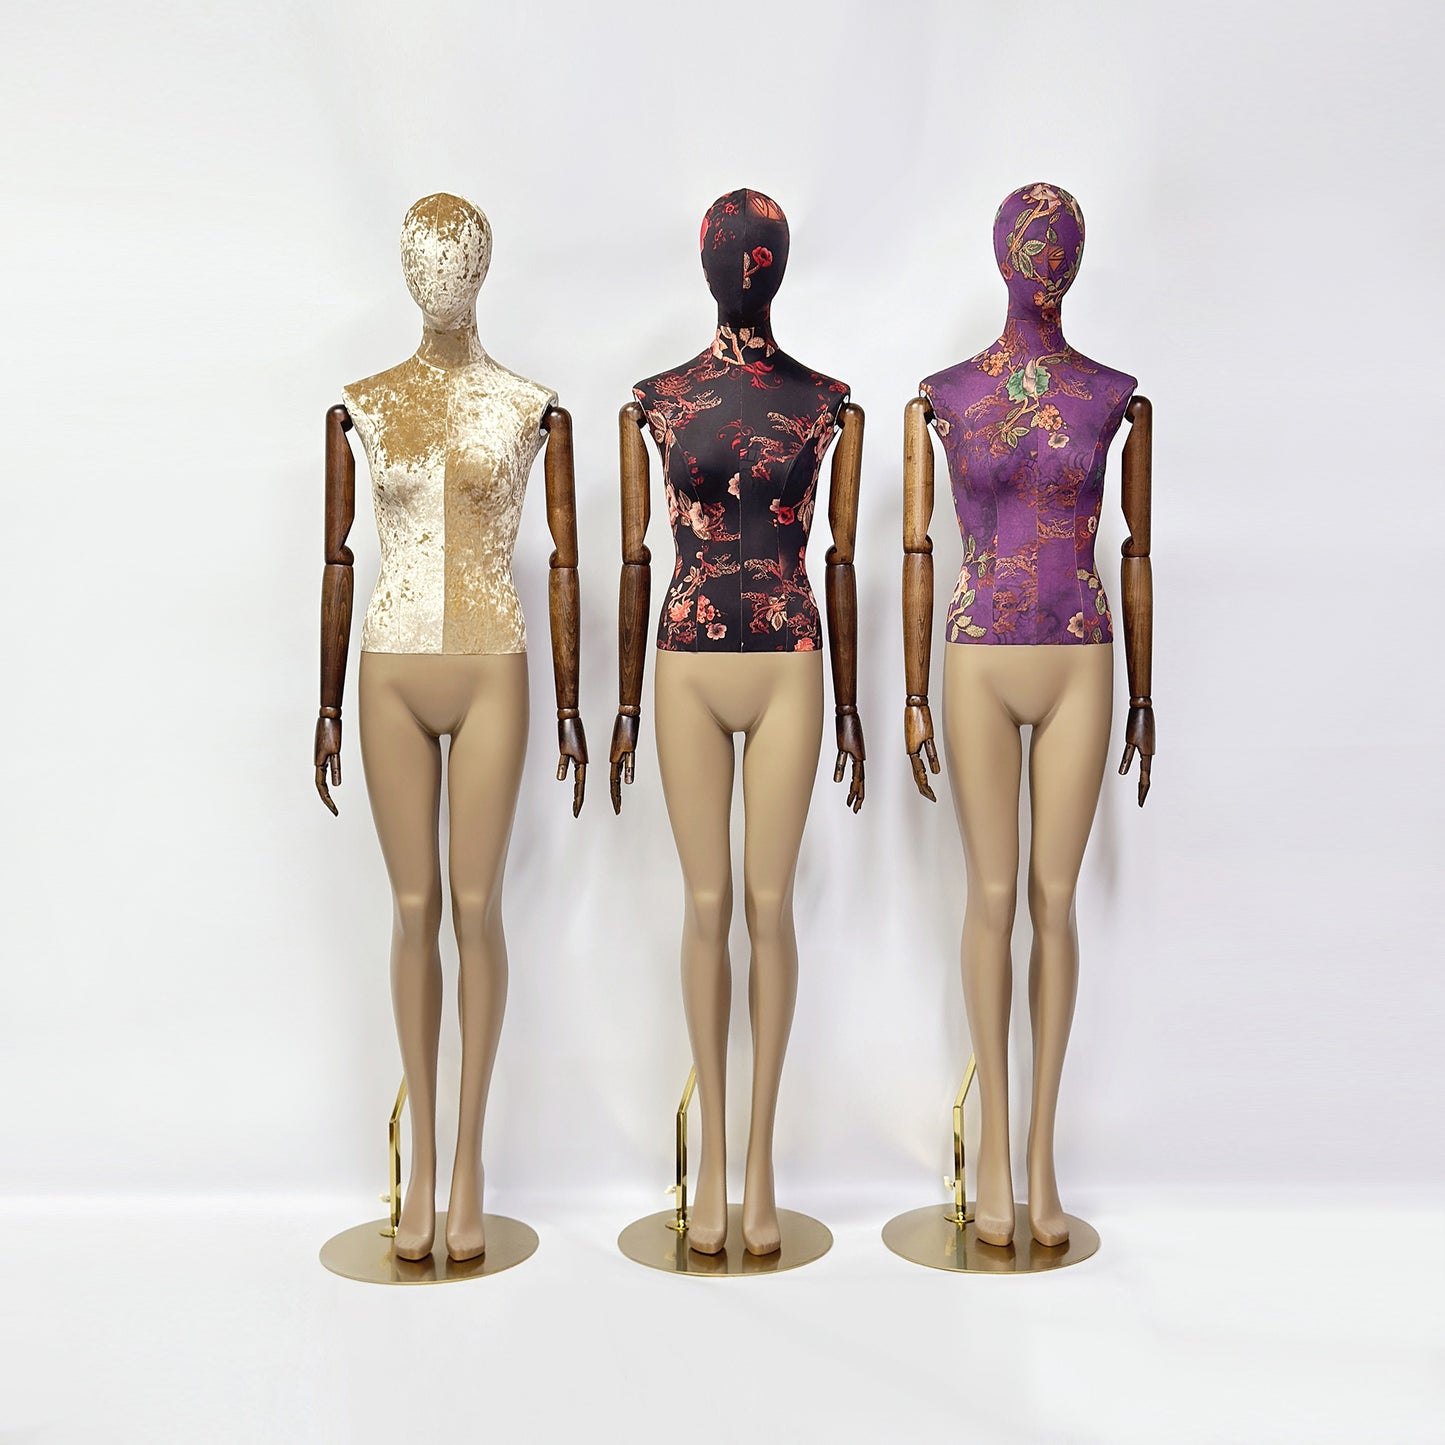 Luxury Mannequin Full Body, DE-LIANG Female Dress Form Torso With Black Wooden Arms, Upper Body Velvet Linen and Painting Brown Leg,1 Piece